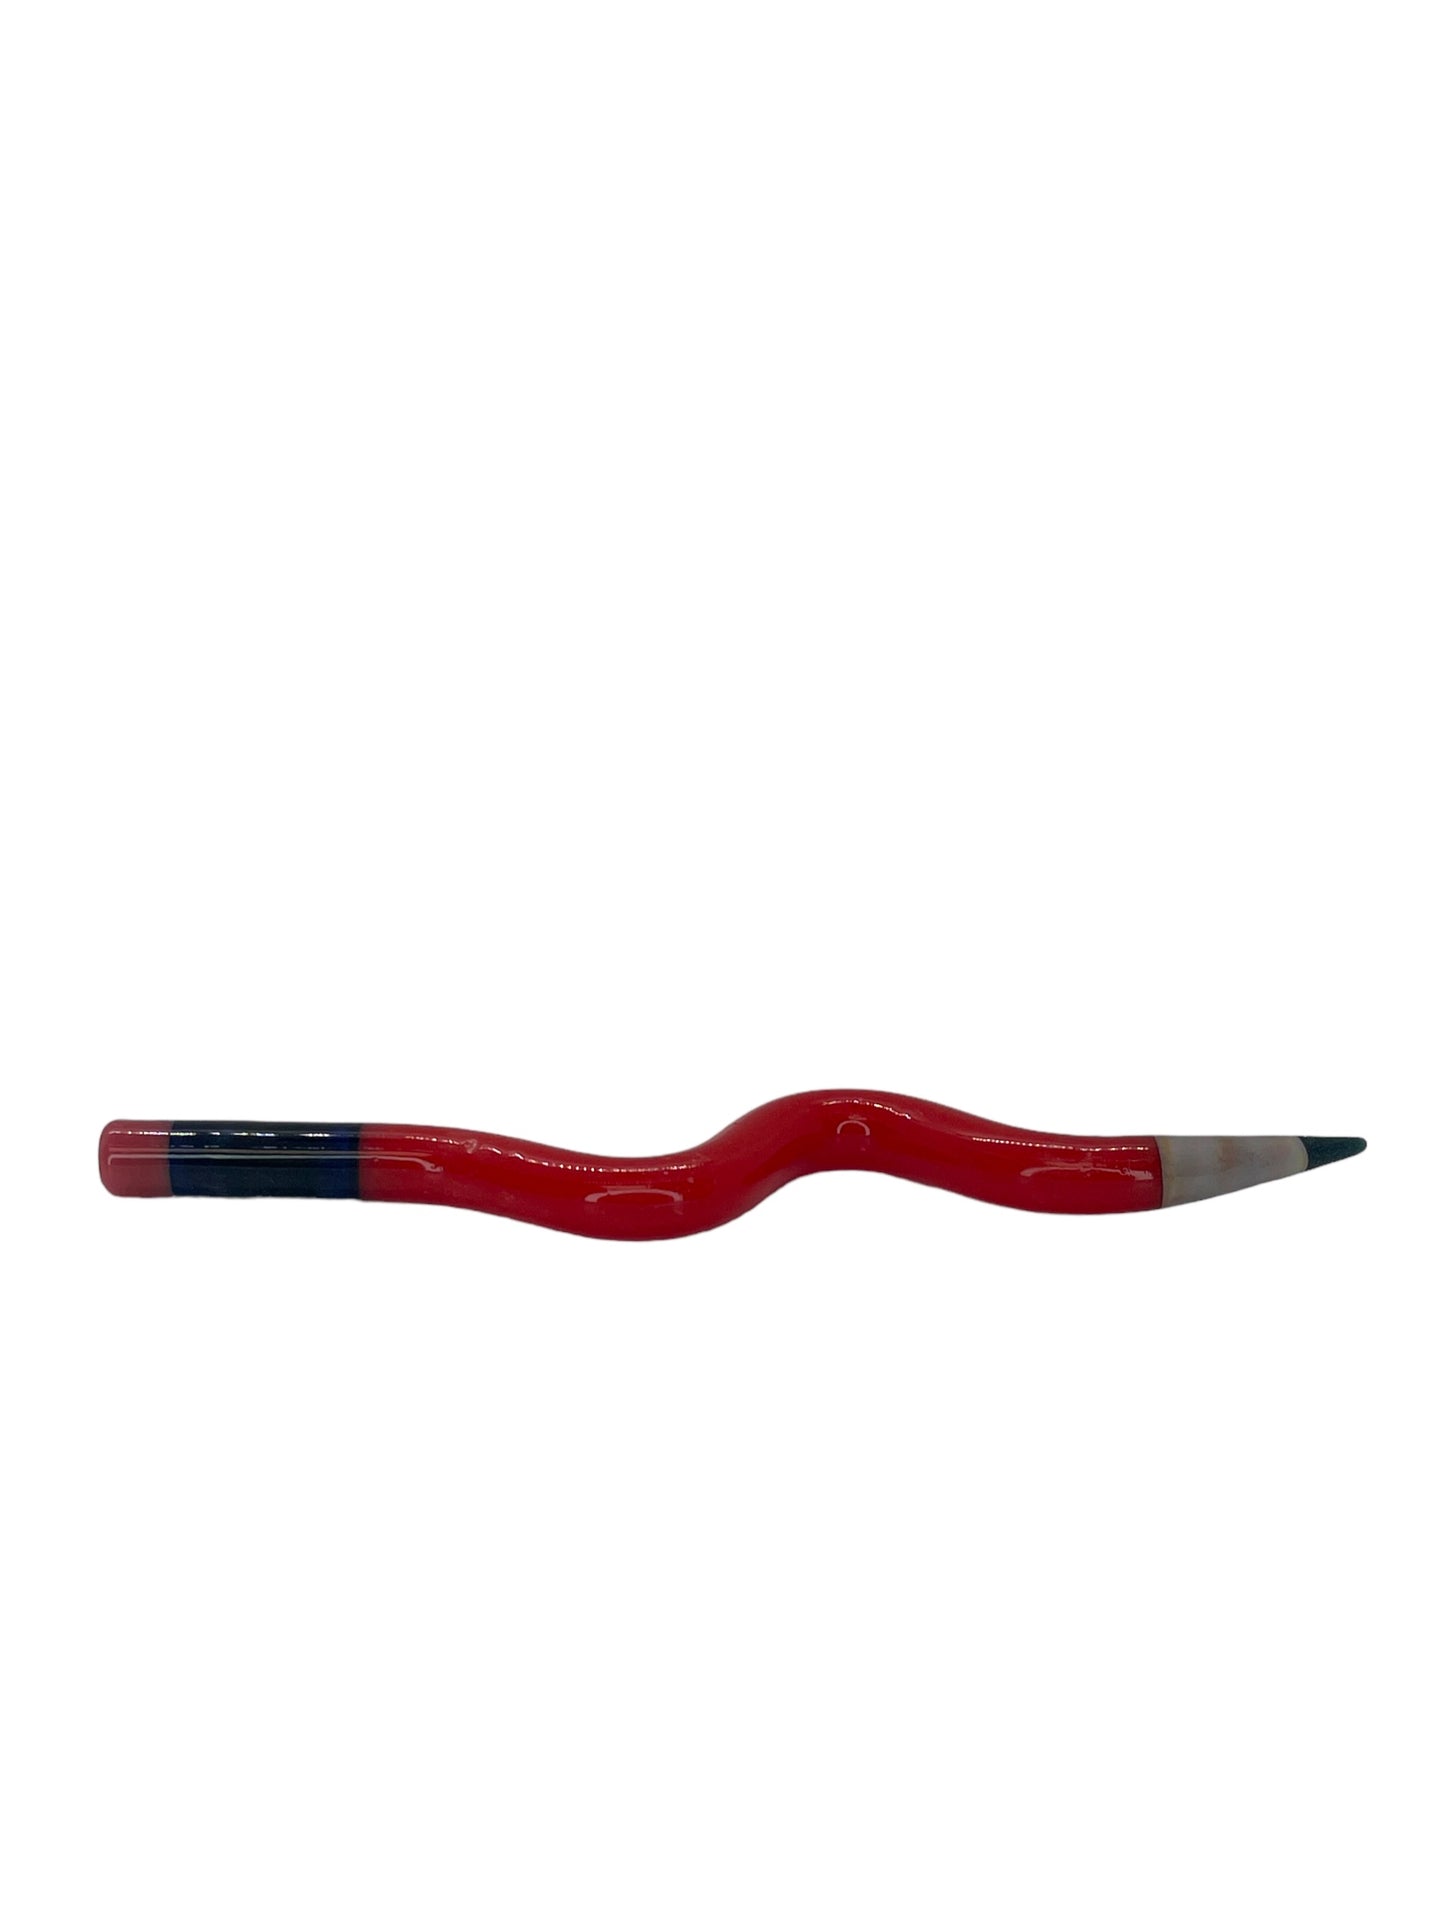 Sherbet Red Curved Pencil